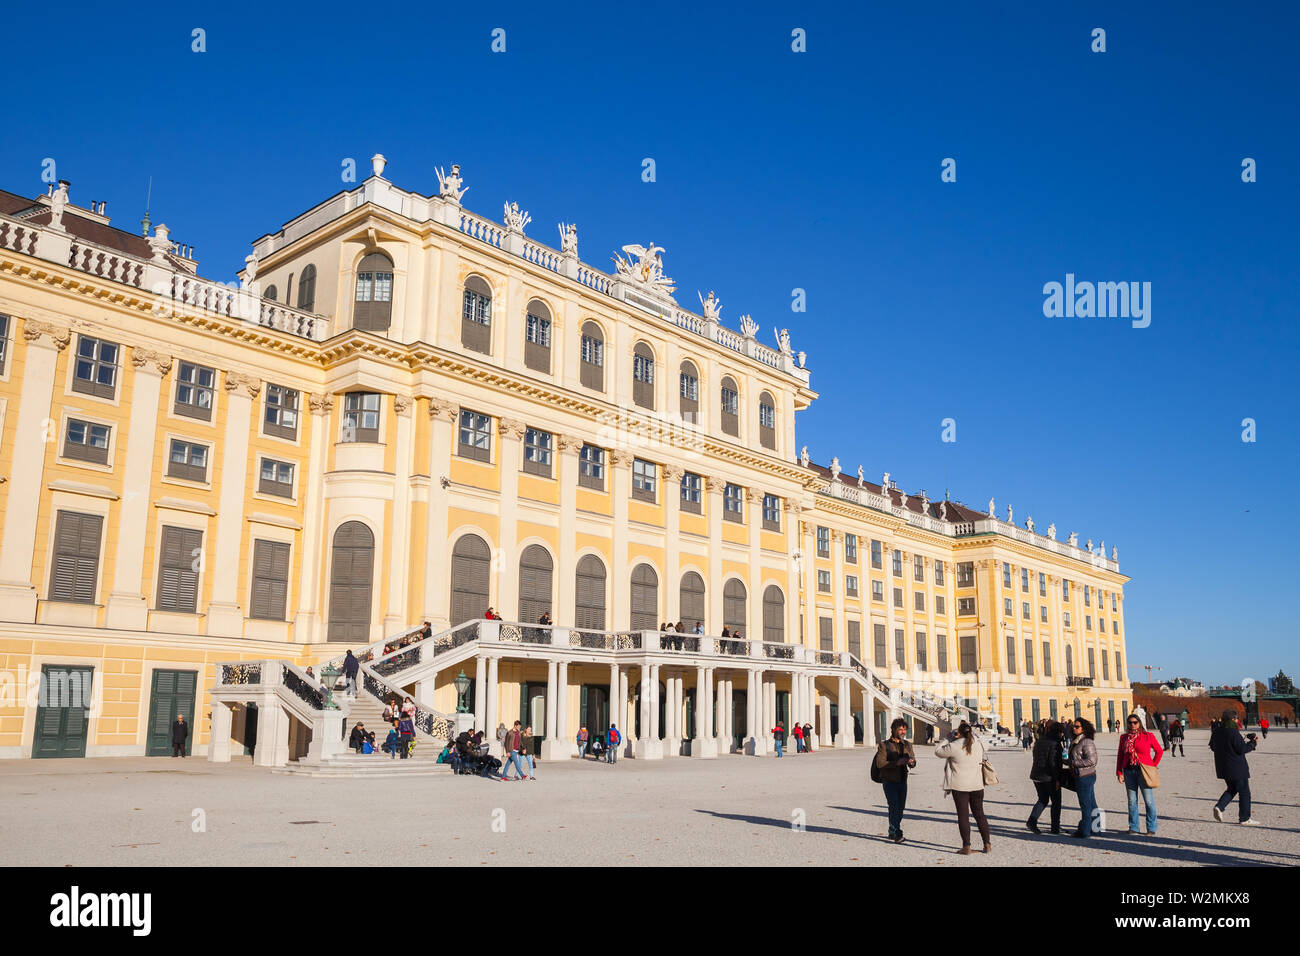 Vienna, Austria - November 1, 2015: People are near Schonbrunn Palace. It is a former imperial summer residence of successive Habsburg monarchs Stock Photo